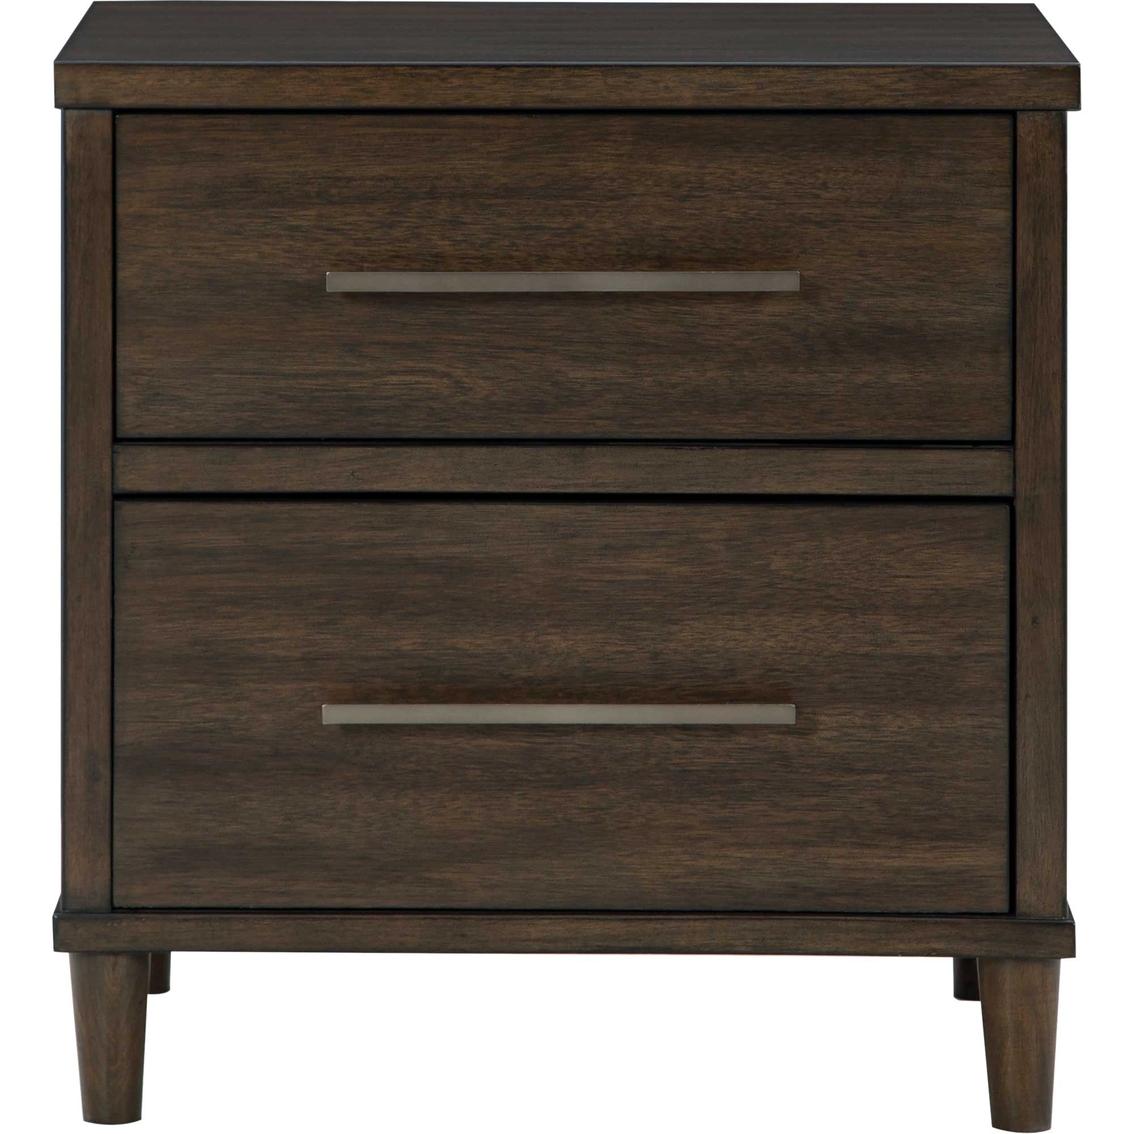 Signature Design by Ashley Wittland Nightstand - Image 2 of 7